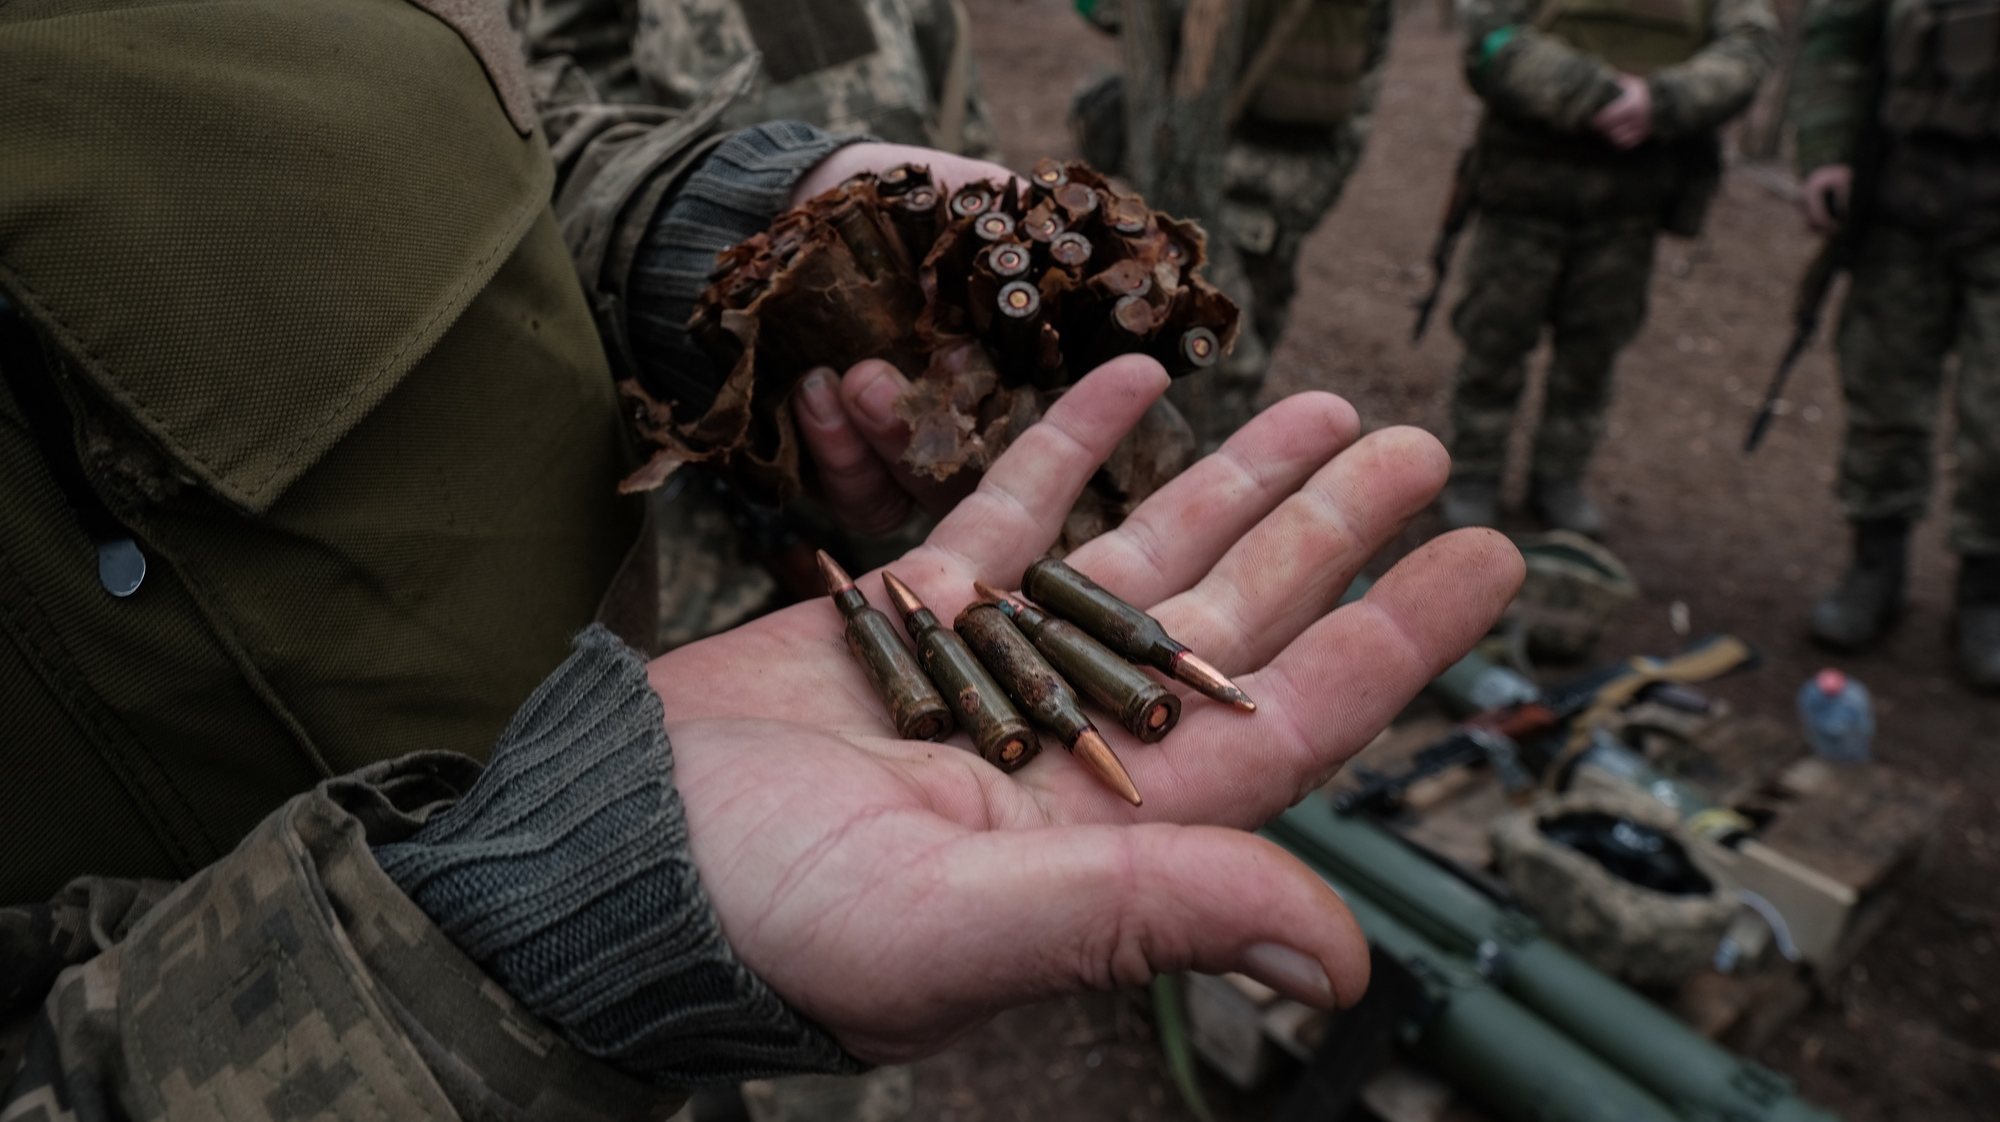 epa11222862 An Ukrainian soldier shows ammunition as new recruits receive training at an undisclosed location in the Donetsk region to complete their formation as infantrymen of Ukraine&#039;s 22nd Army Brigade, Donetsk, Ukraine 15 March 2024. The training lasts several months and recruits are instructed in combat medicine, handling of small arms, RPGs and BMP-1 type armoured vehicles, among other training. The Ukrainian Army is currently seeking to enlist 350,000 new soldiers to replace those who have been fighting for more than two years after Russian troops entered Ukrainian territory in February 2022, starting a conflict that has provoked destruction and a humanitarian crisis.  EPA/Maria Senovilla